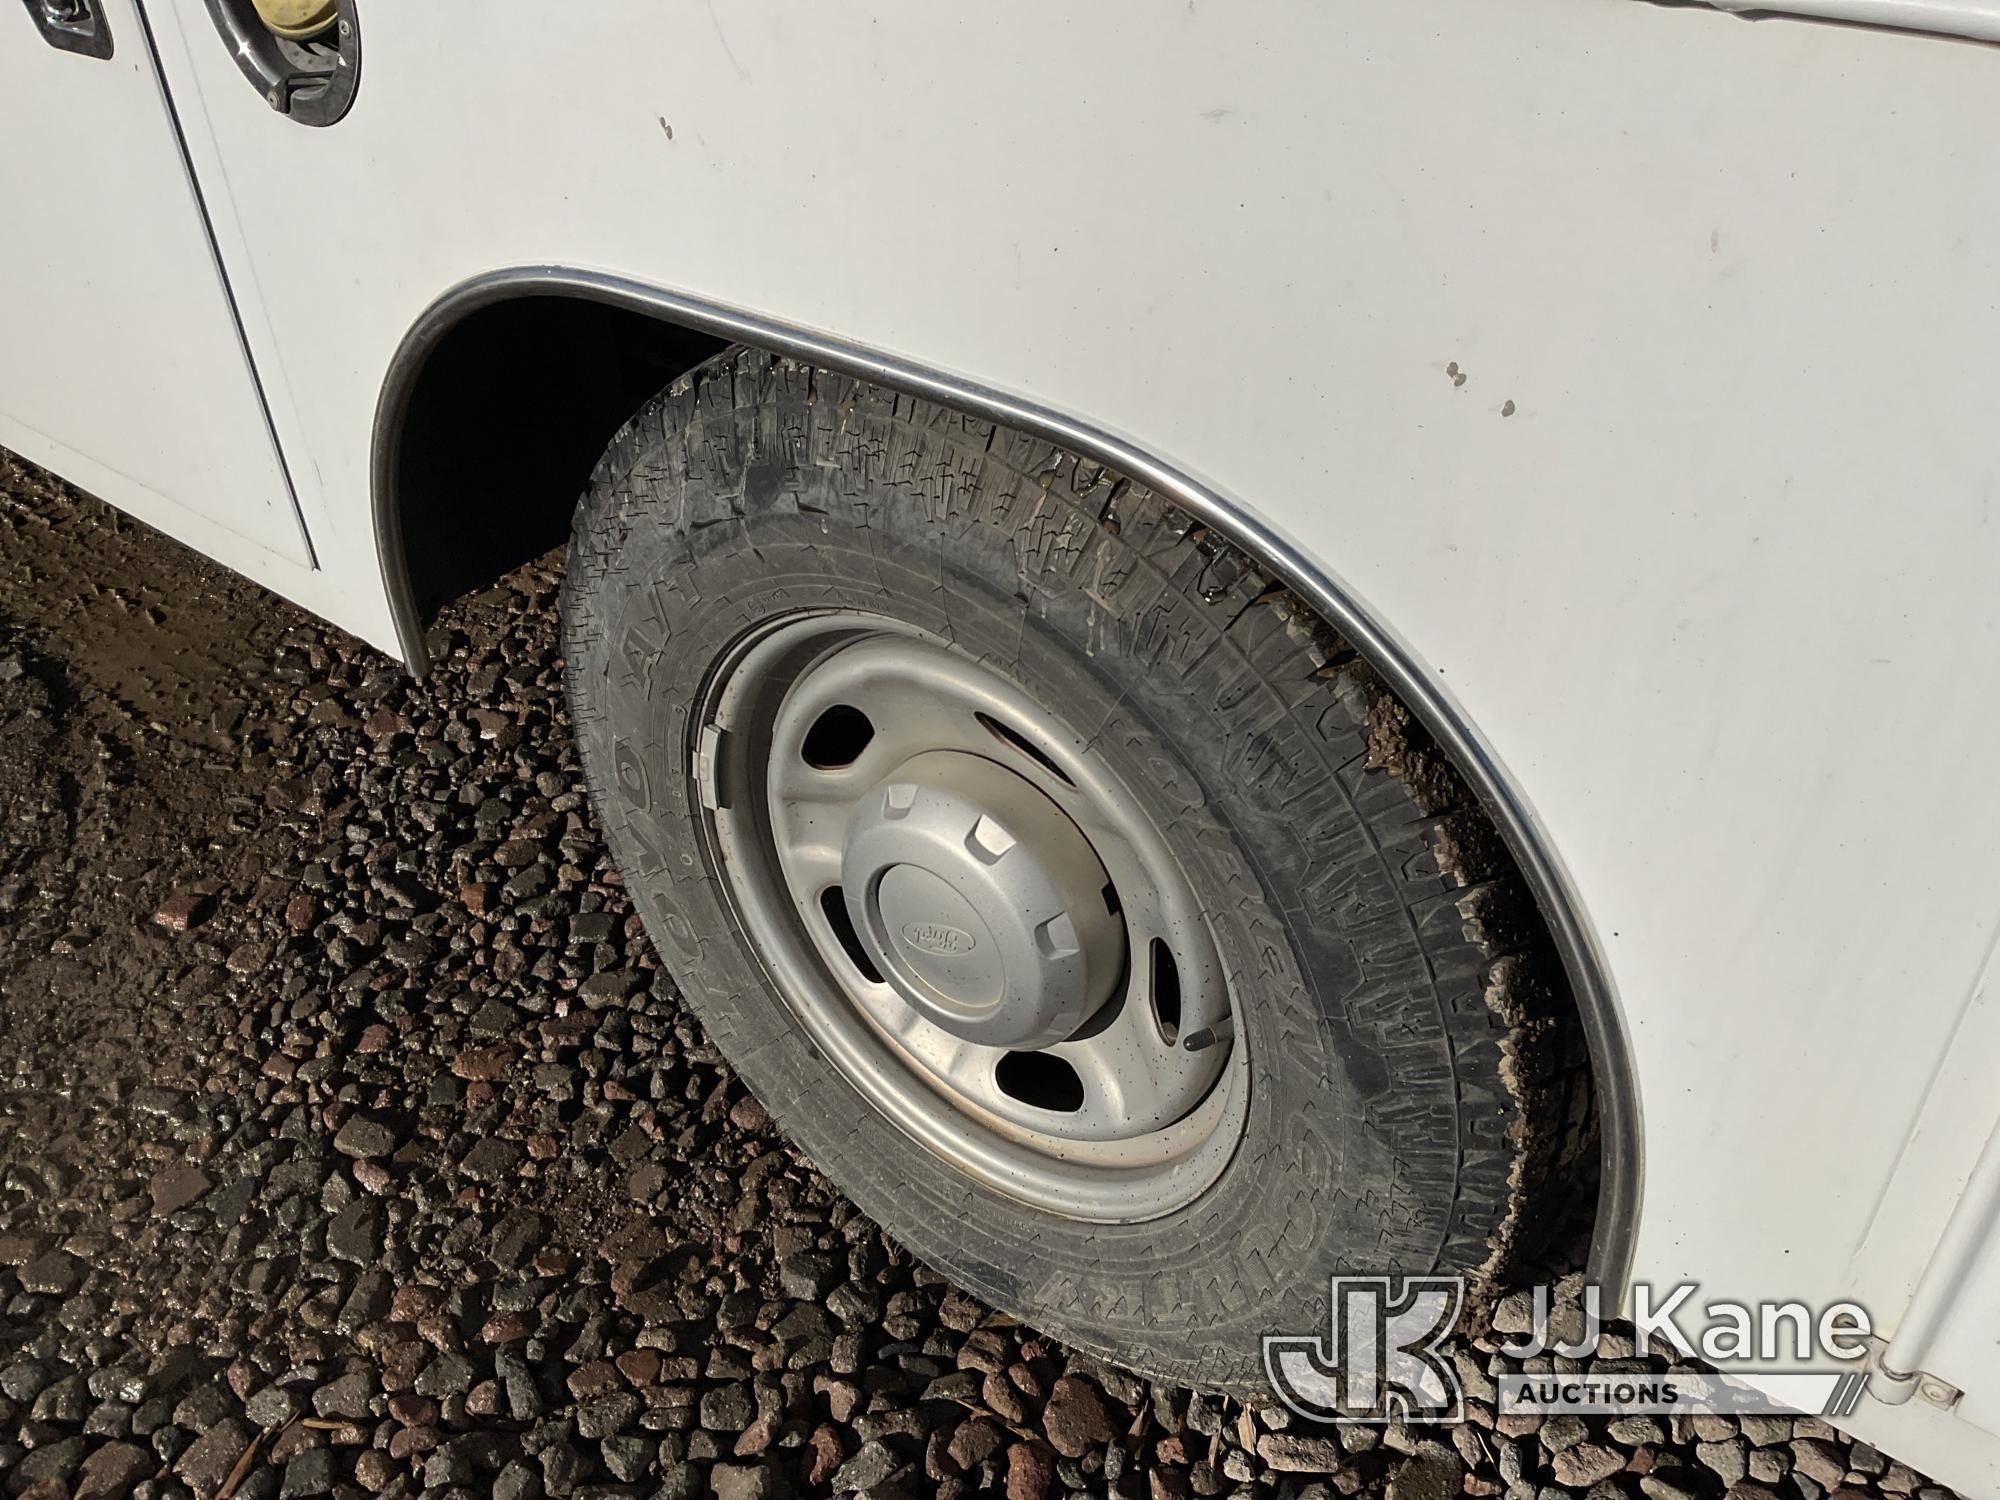 (Dixon, CA) 2012 Ford F250 Extended-Cab Service Truck Runs & Moves, Bad Alternator, Tire Leaks Air